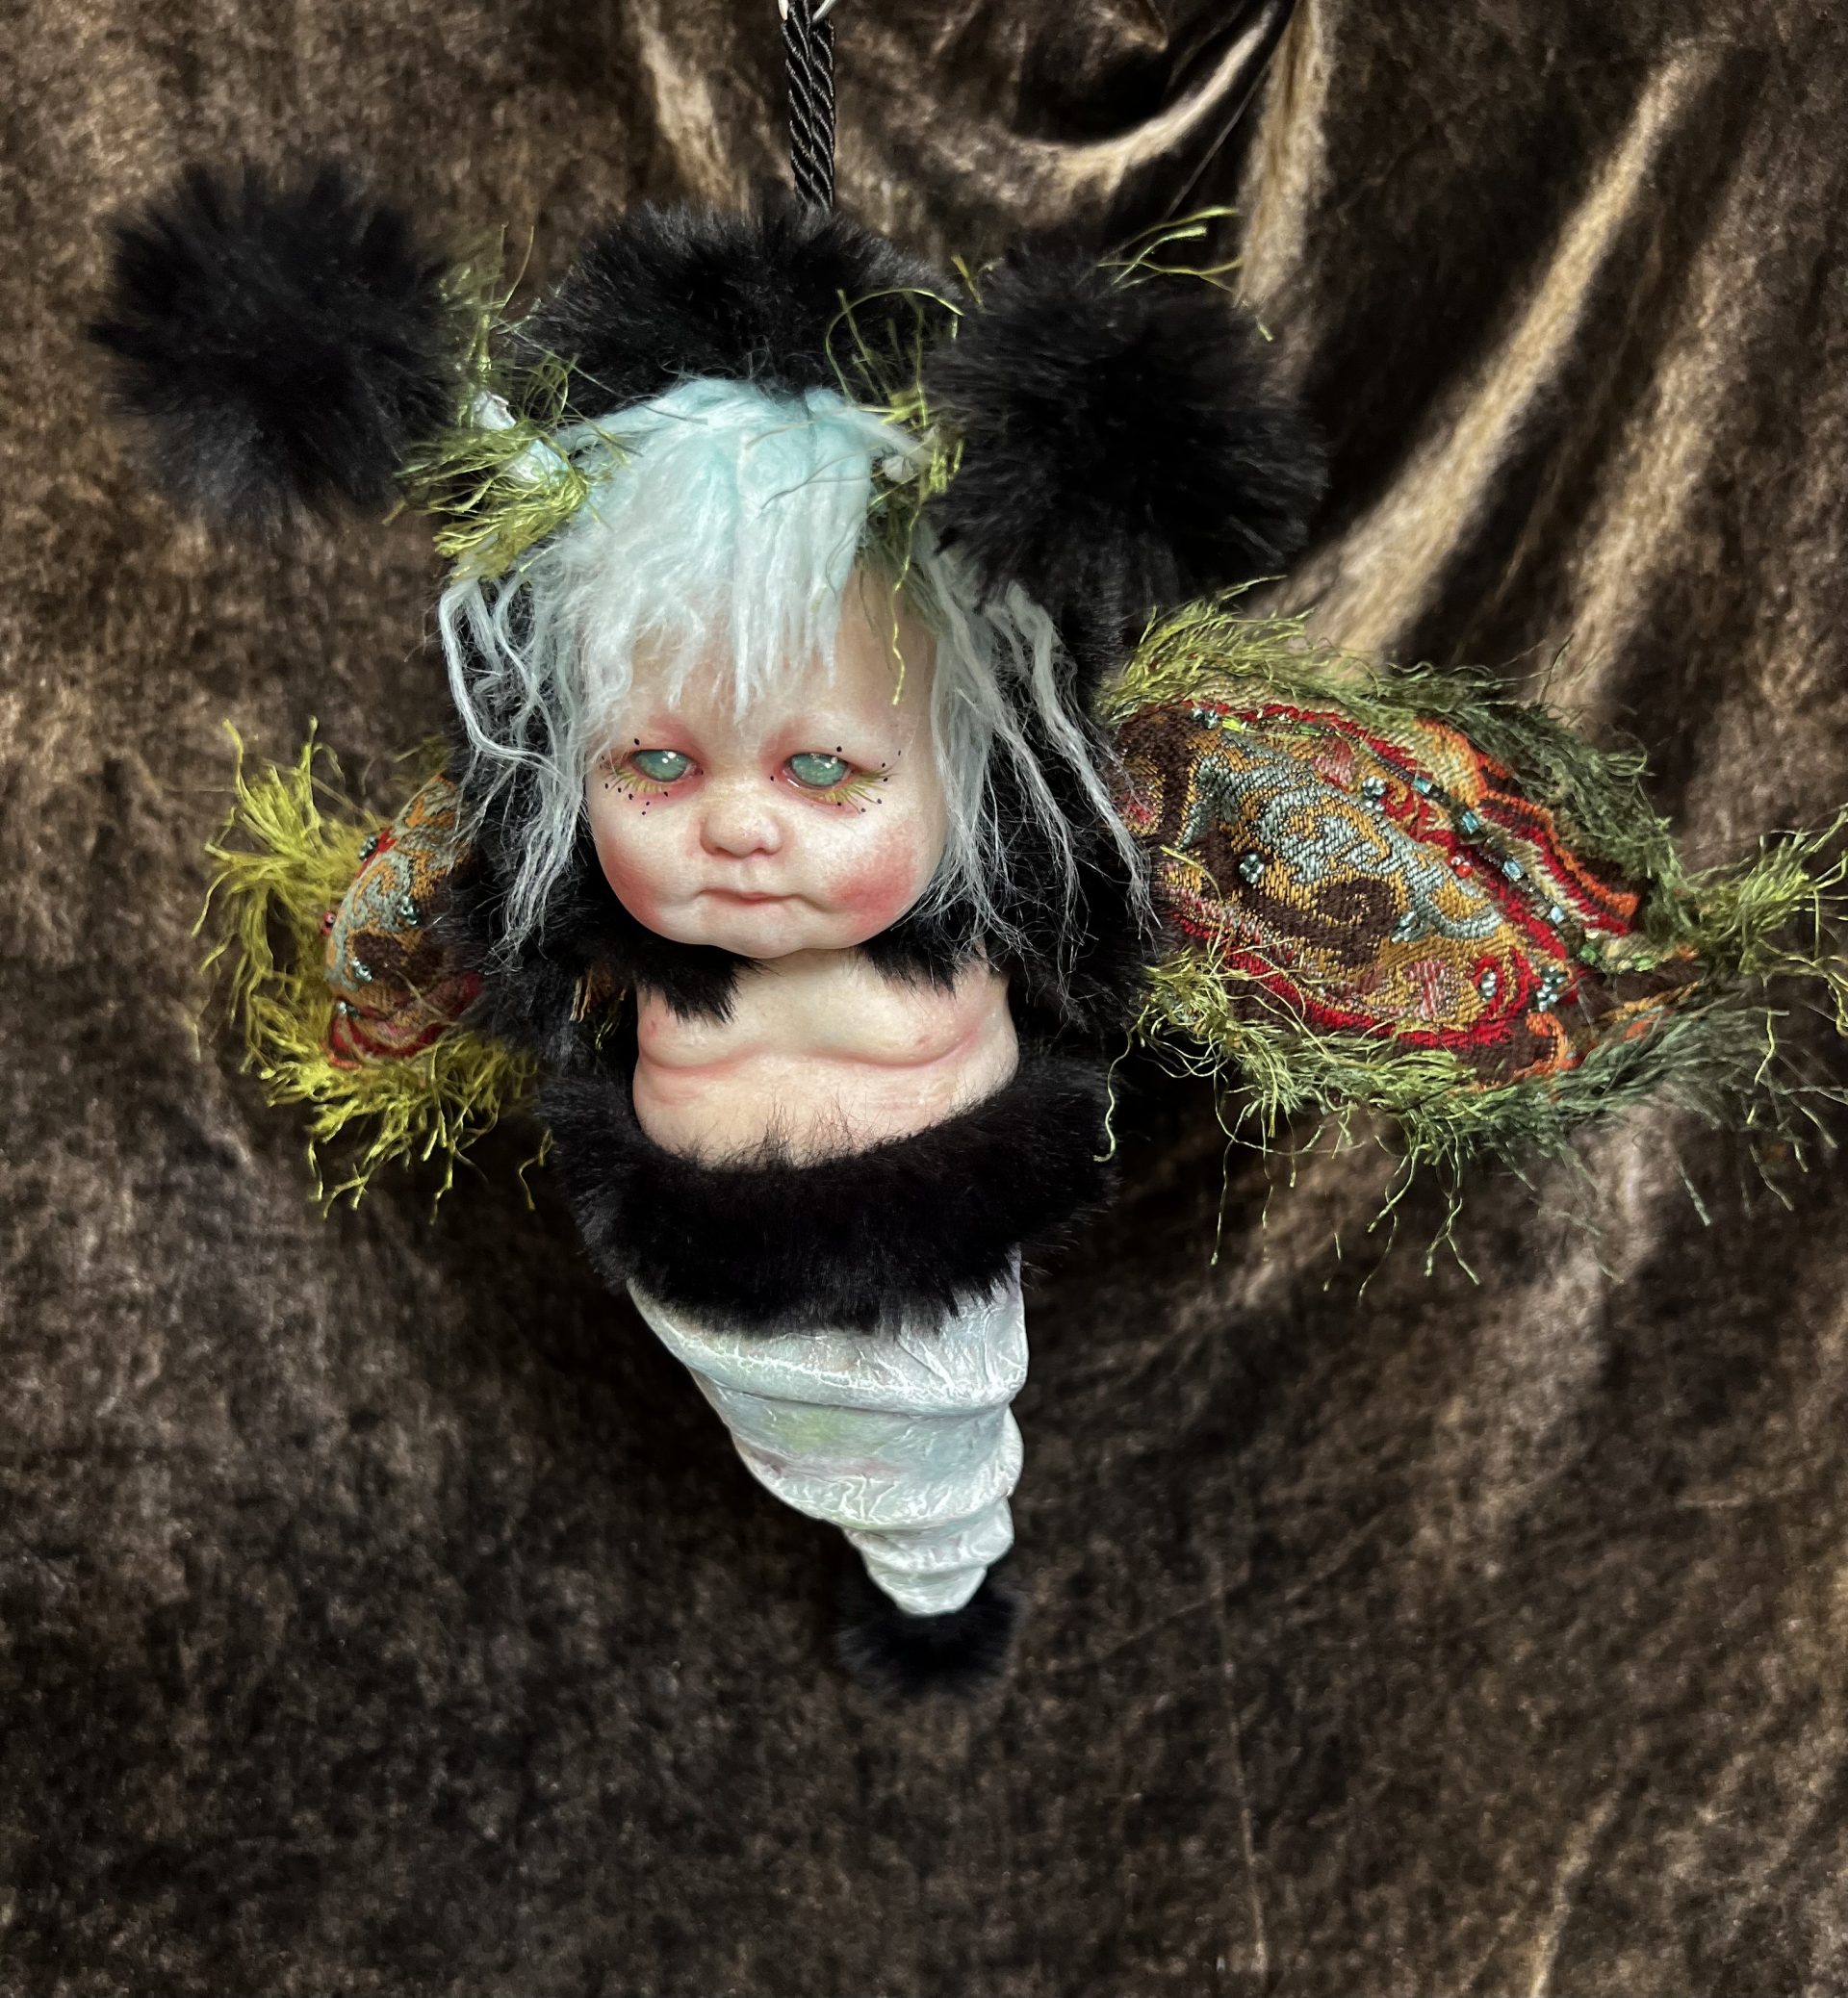 chubby babydoll moth hybrid art doll hand-painted with tapestry wings and black fur, light blue, red and green